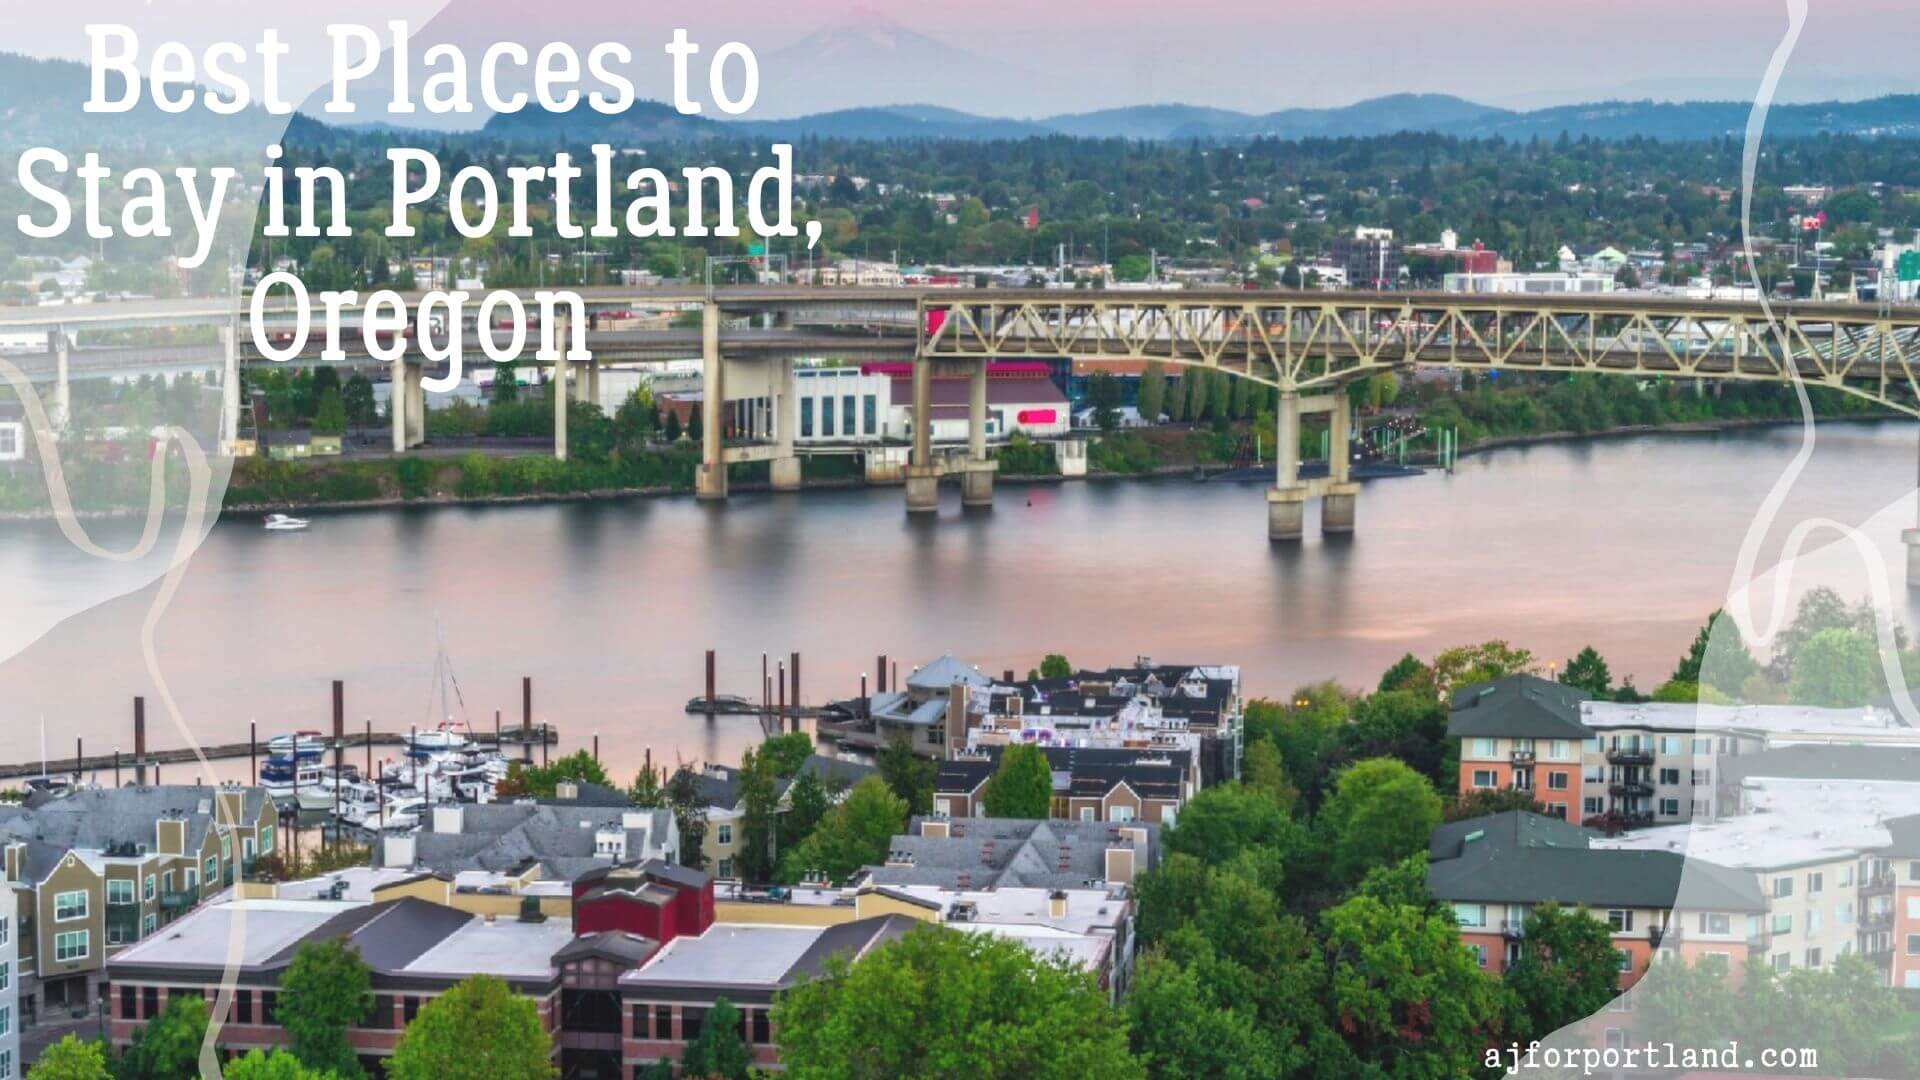 Best Places to Stay in Portland